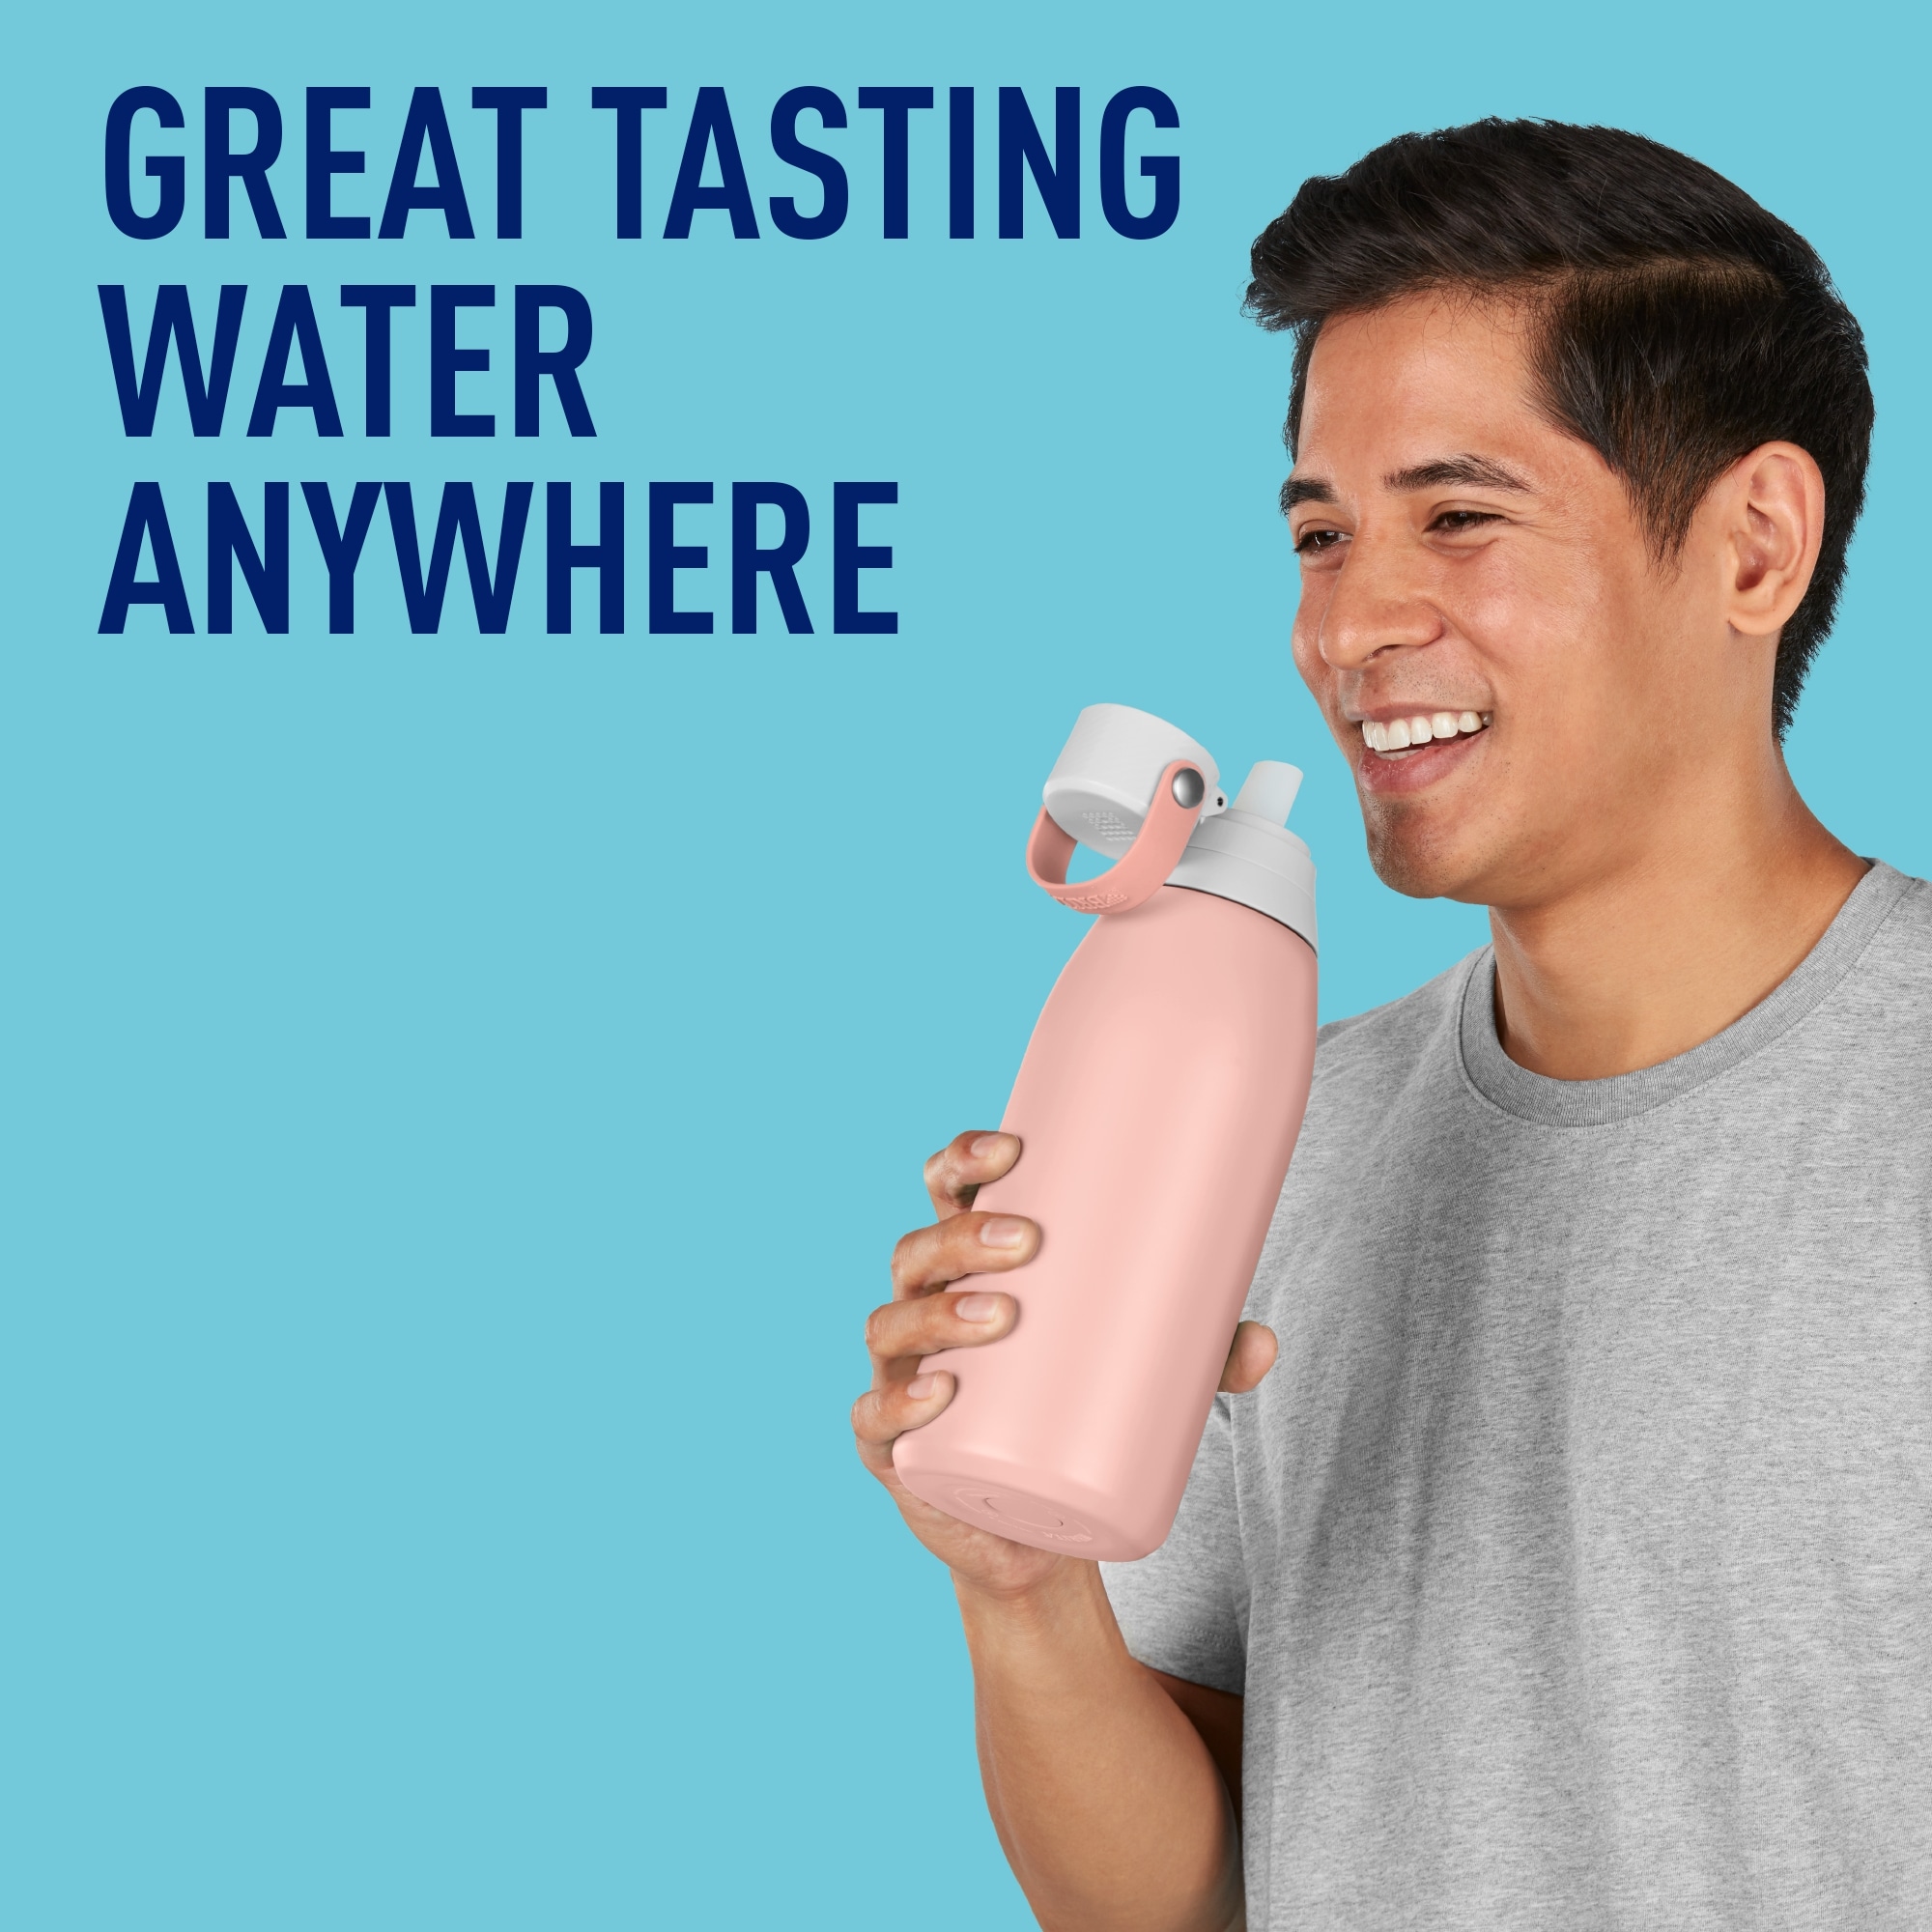 Brita Insulated Filtered Water Bottle with Straw, $12+, 10-Piece Stainless  Steel Measuring Cups and Spoons, $8+, Immersion Electric Hand Blender Set,  $19+